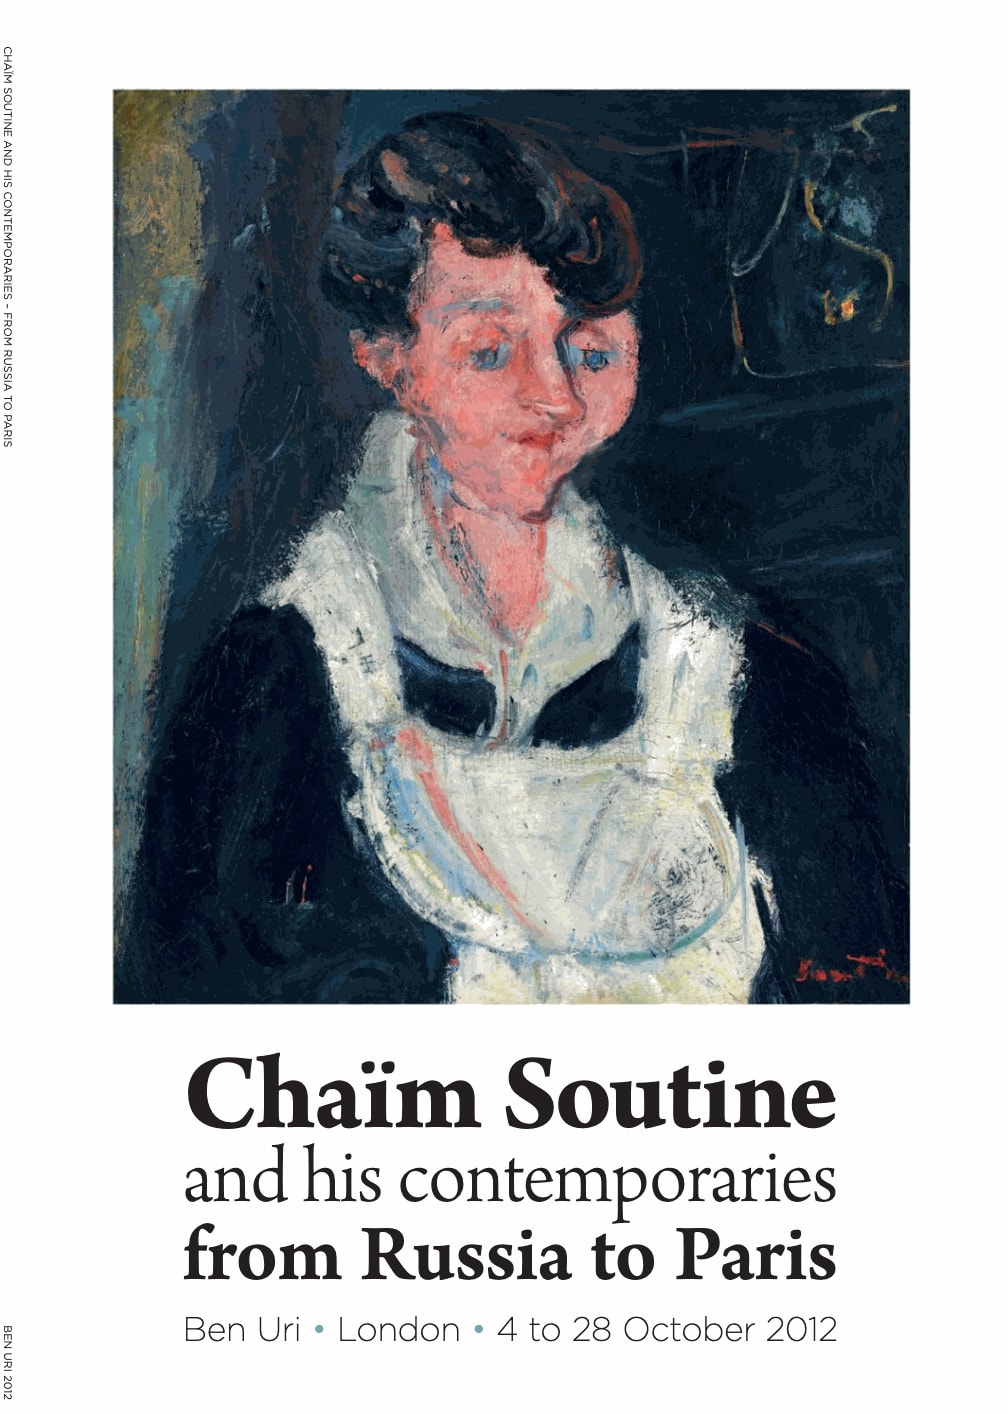 Chaim Soutine and his Contemporaries Read it here